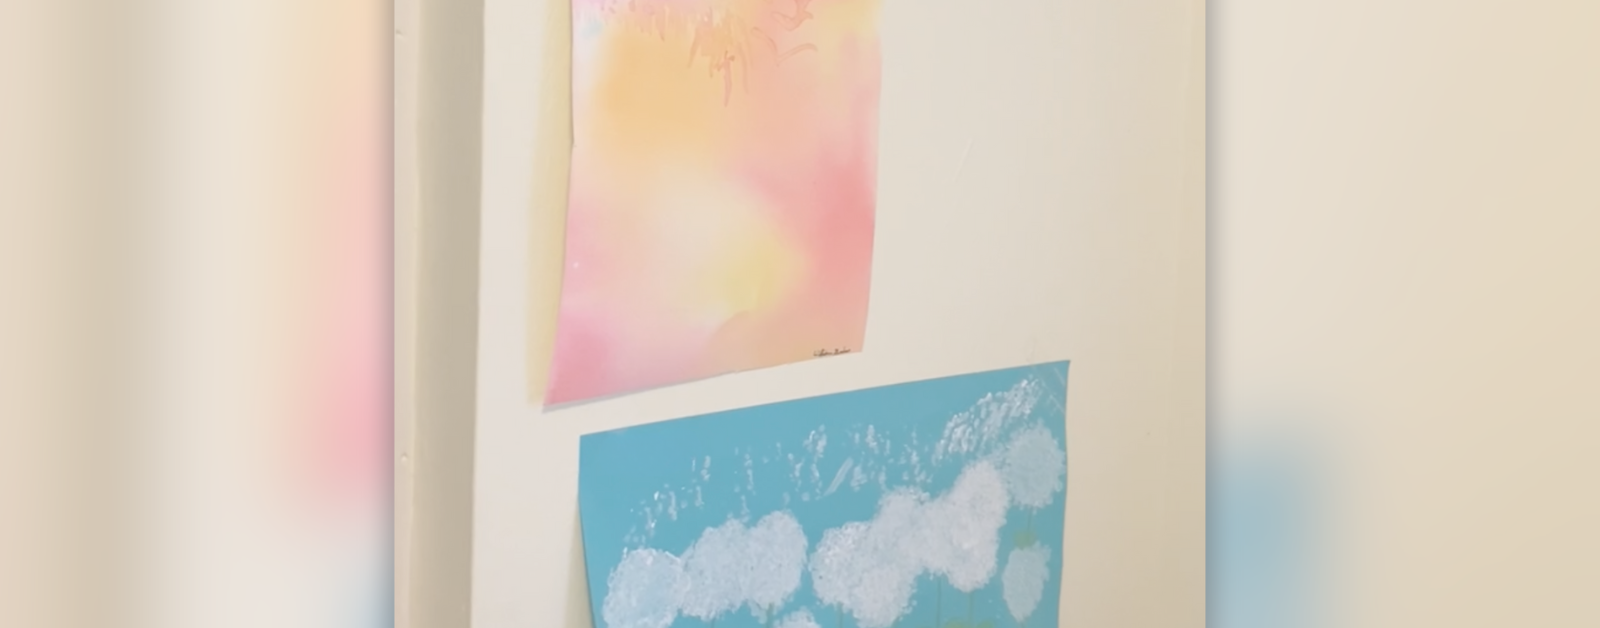 faded photo of children's brightly colored pictures on the wall